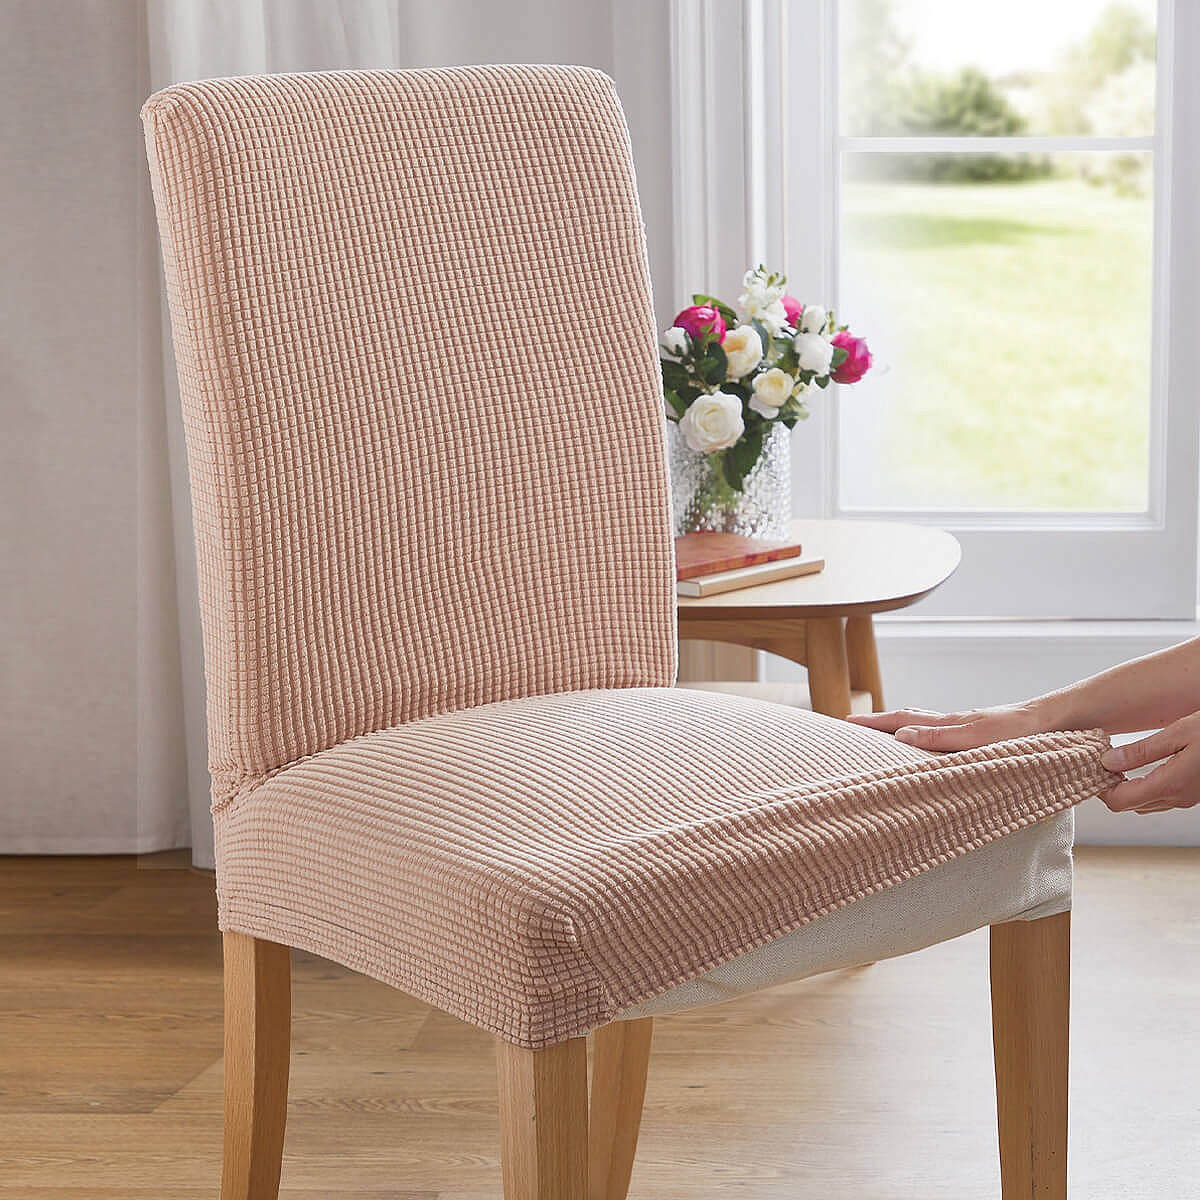 stretch chair covers for sale